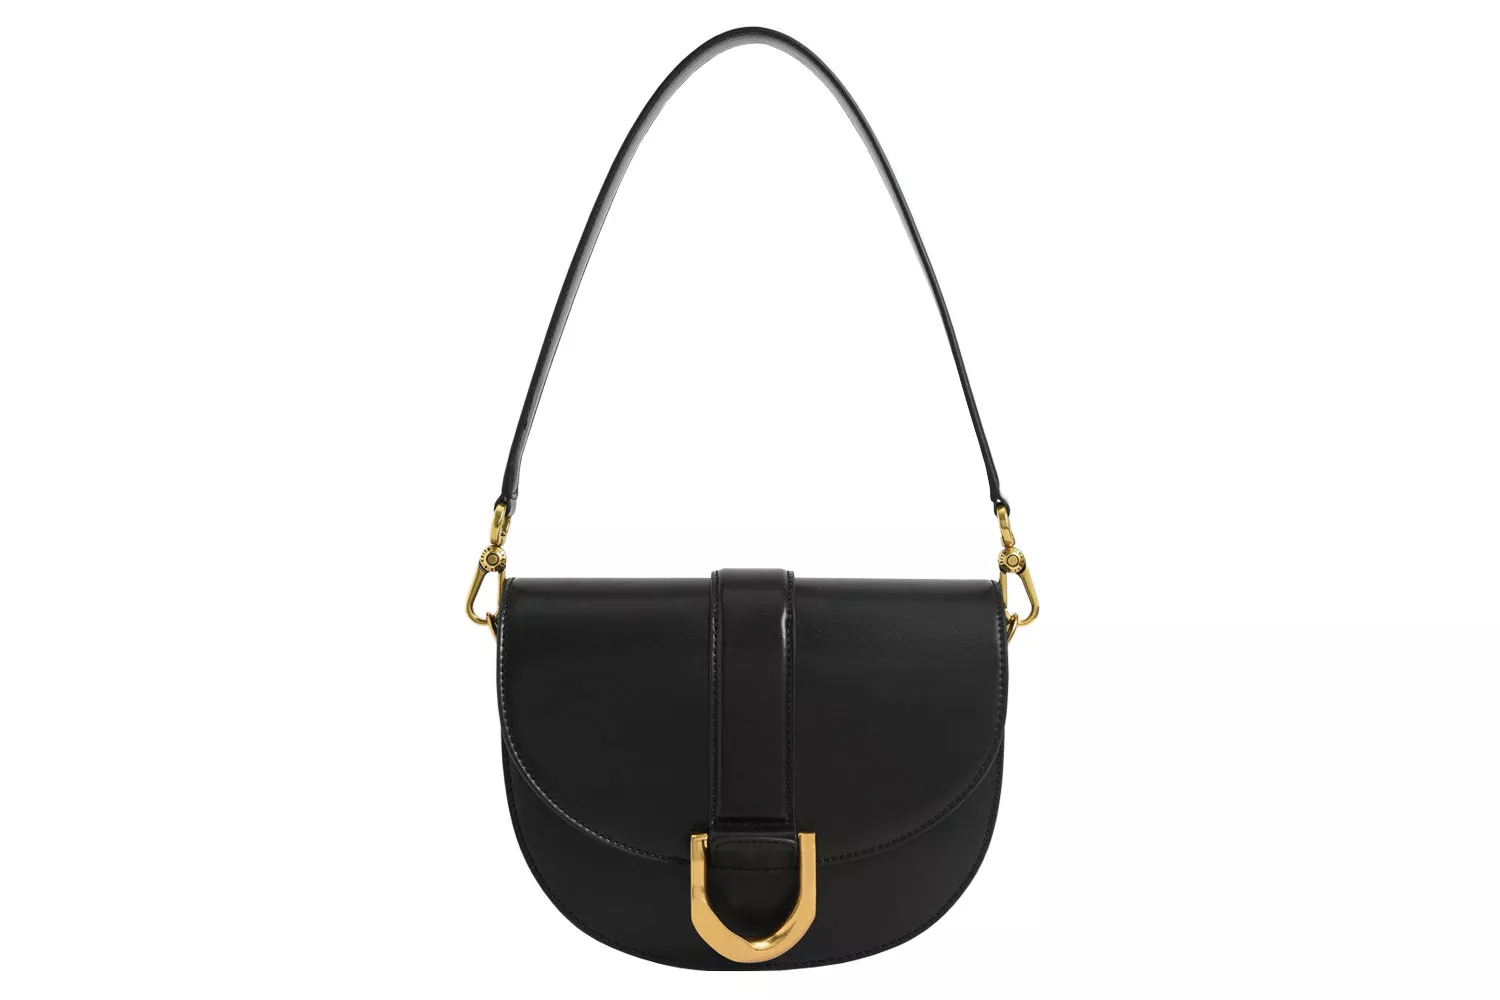 The Best Budget Crossbody Bags that Make Your Busy Days Easier: Charles & Keith Gabine Saddle Bag